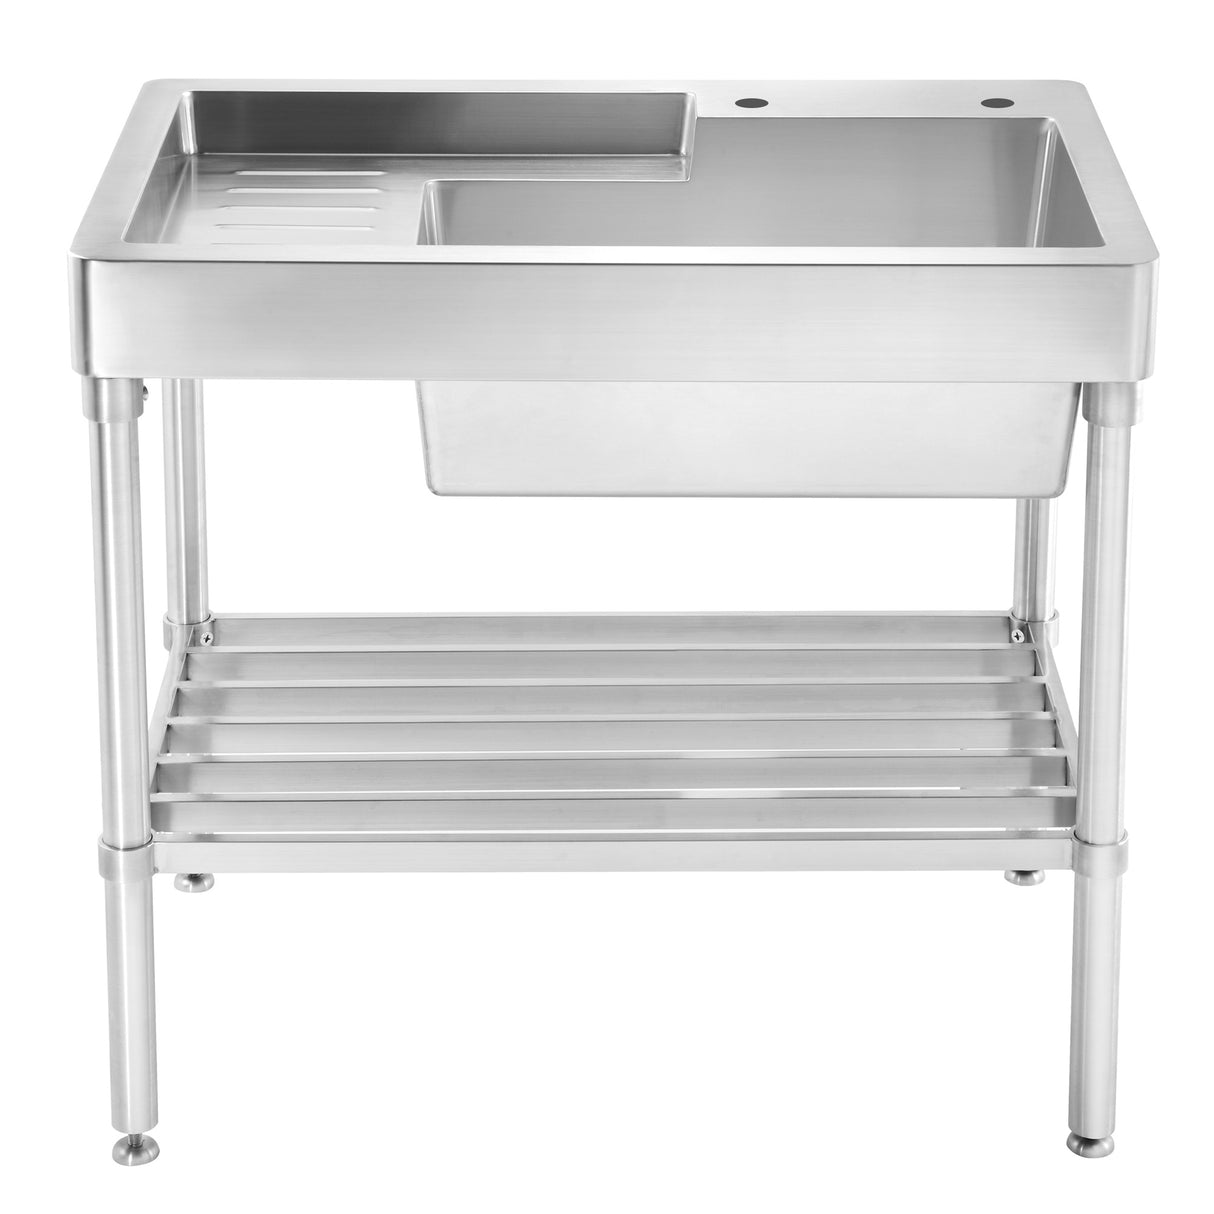 Pearlhaus Brushed Stainless Steel  Single Bowl, Freestanding Utility Sink with Drainboard and Lower Rack